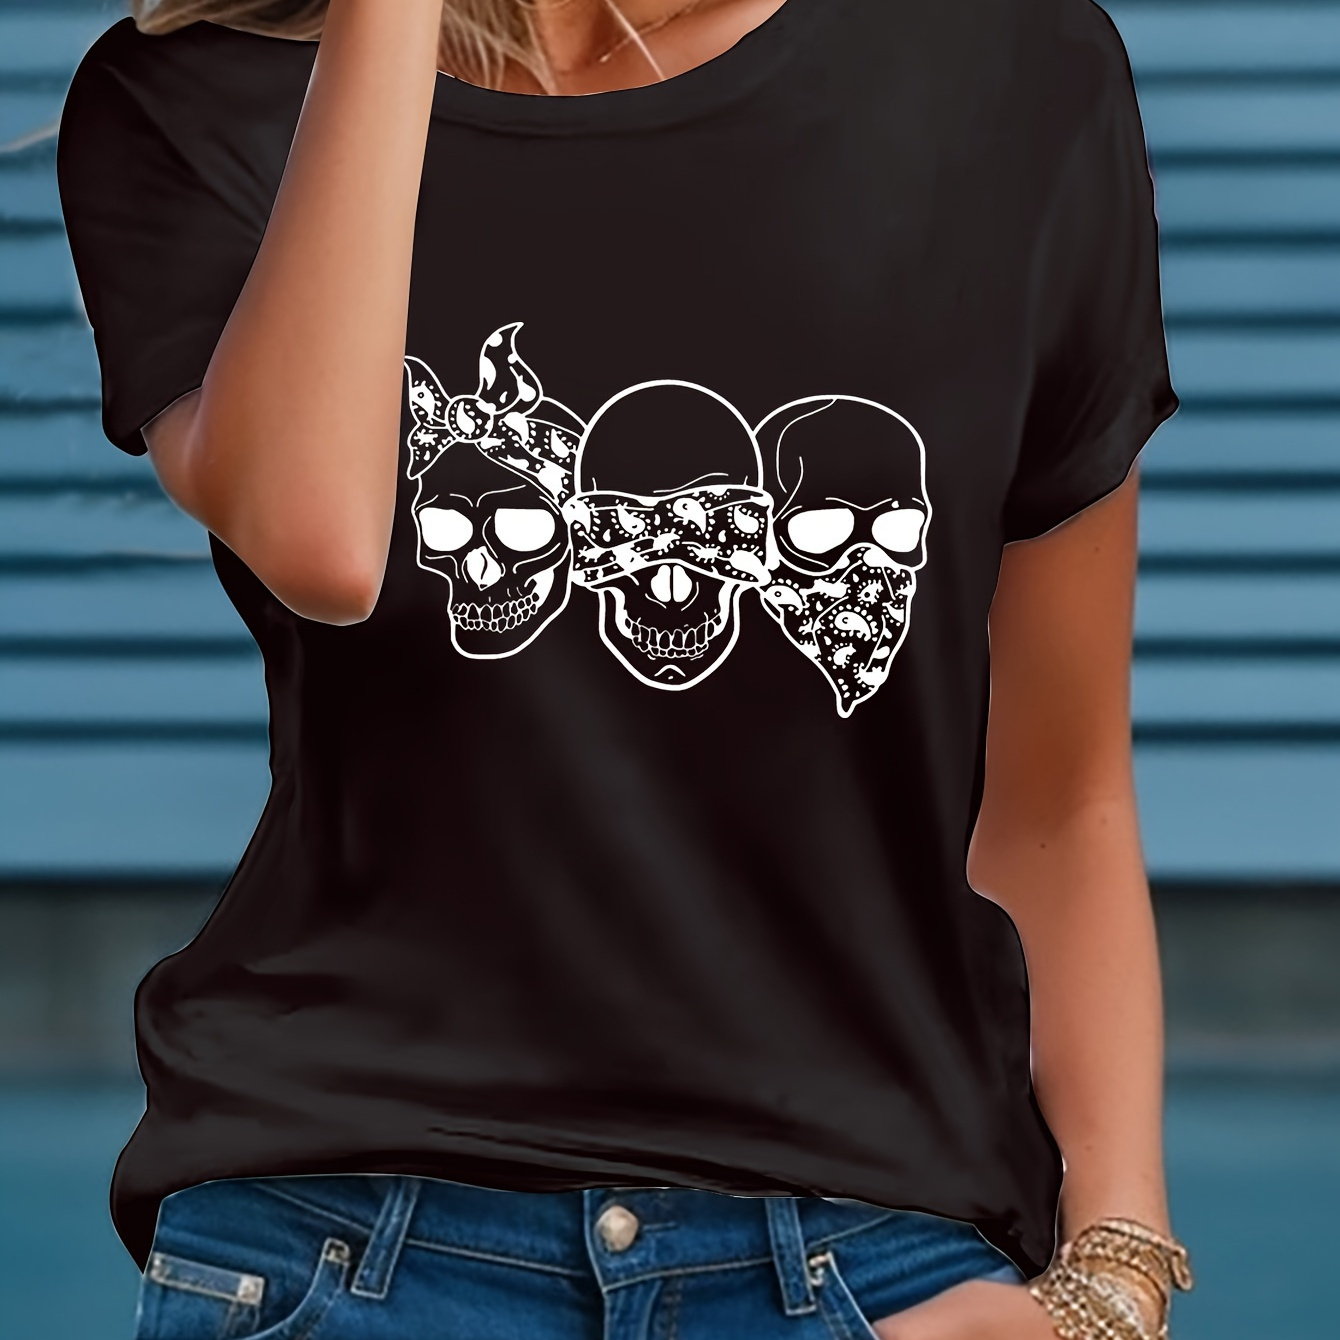 

Skulls Graphic Print T-shirt, Short Sleeve Crew Neck Casual Top For Summer & Spring, Women's Clothing